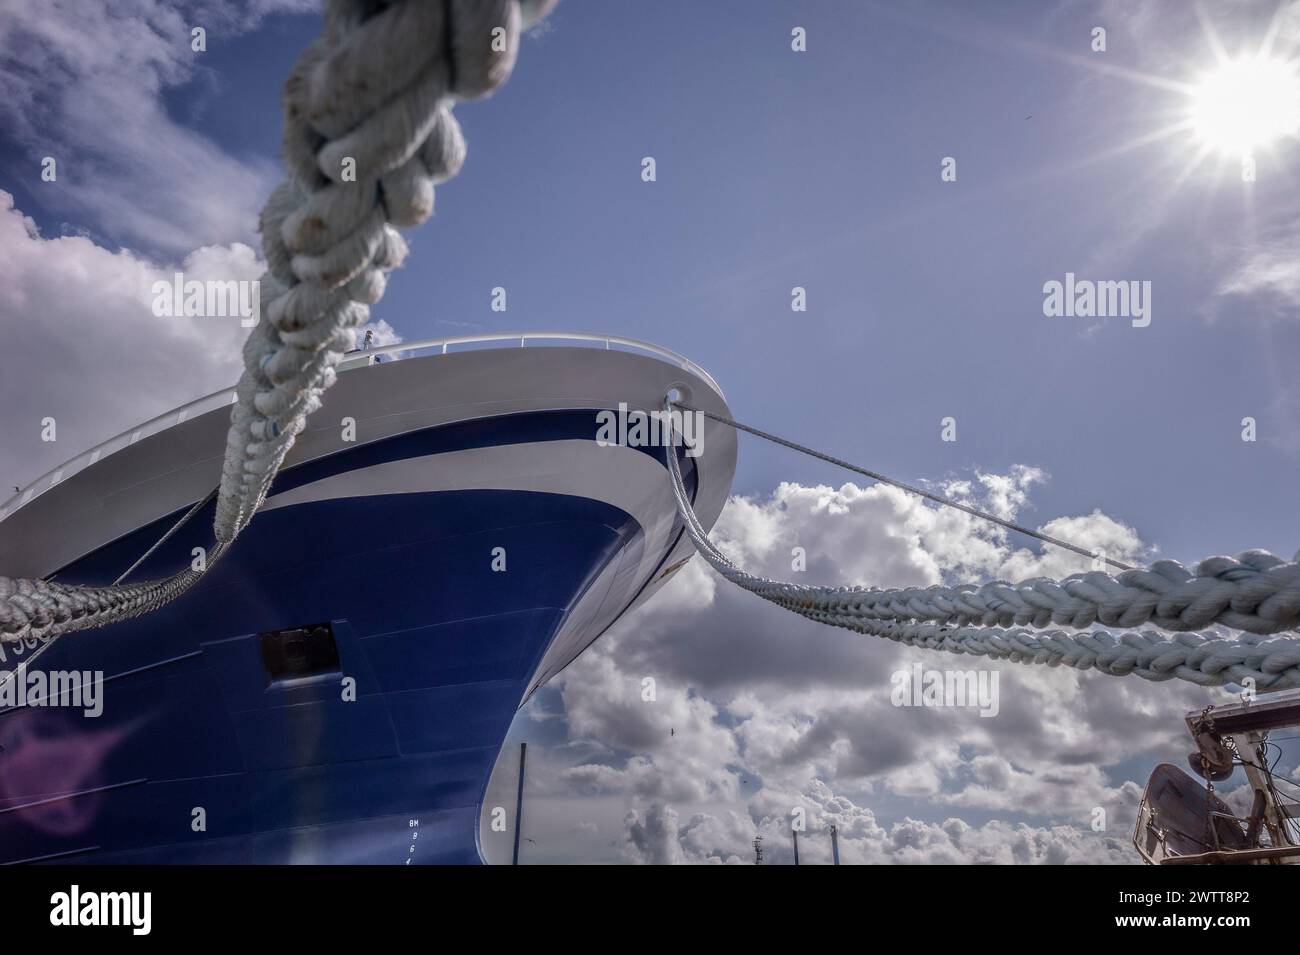 A ship moored under a sunny sky, viewed through the sturdy ropes that secure it Stock Photo